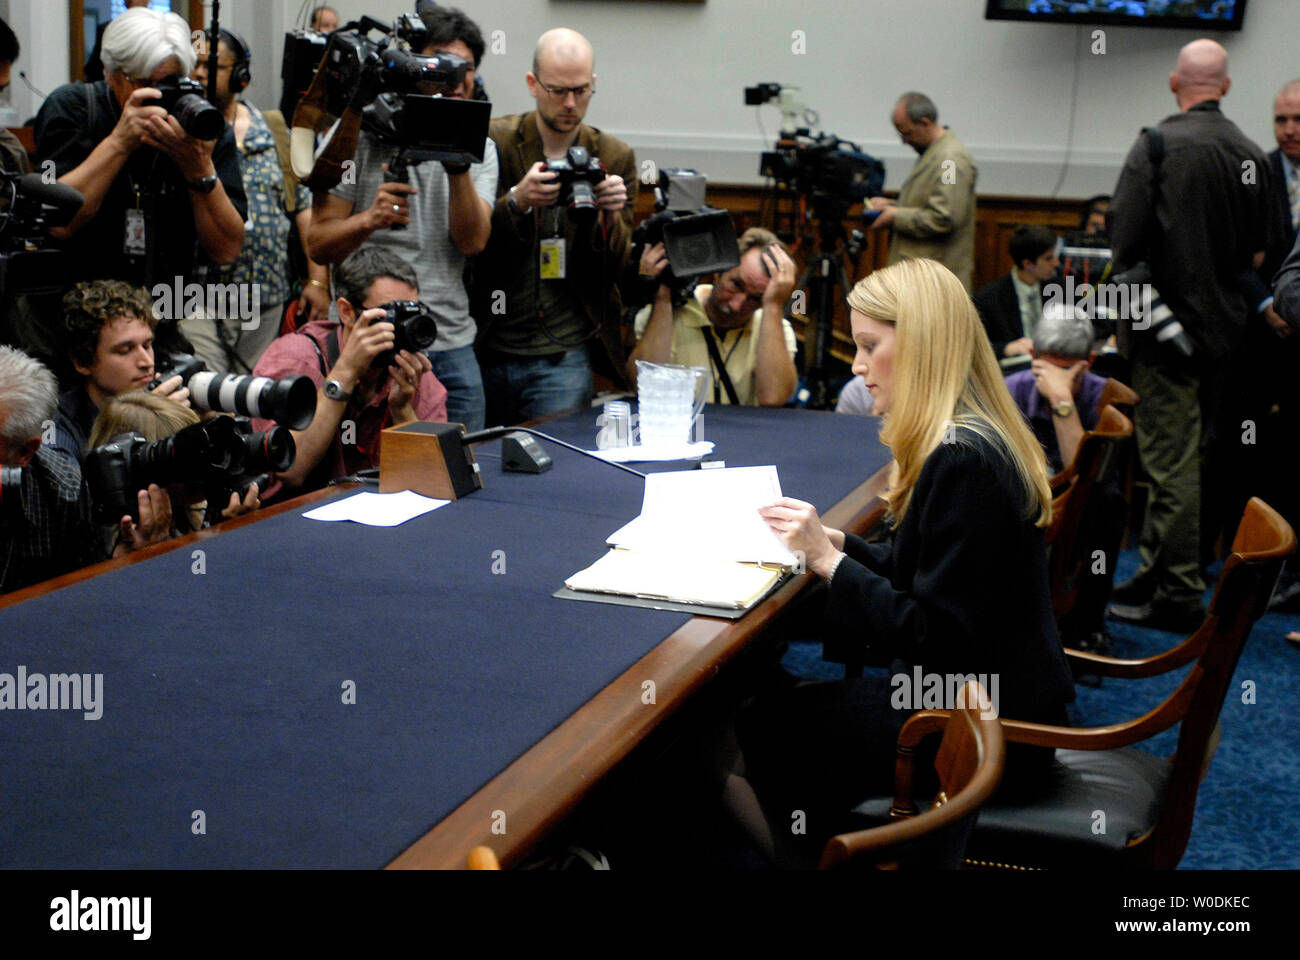 Monica Goodling, former Justice Department White House Liaison, takes her seat prior to testifying before a House Judiciary Committee hearing on the firings of U.S. Attorneys, on Capitol Hill in Washington on May 23, 2007. (UPI Photo/Kevin Dietsch) Stock Photo